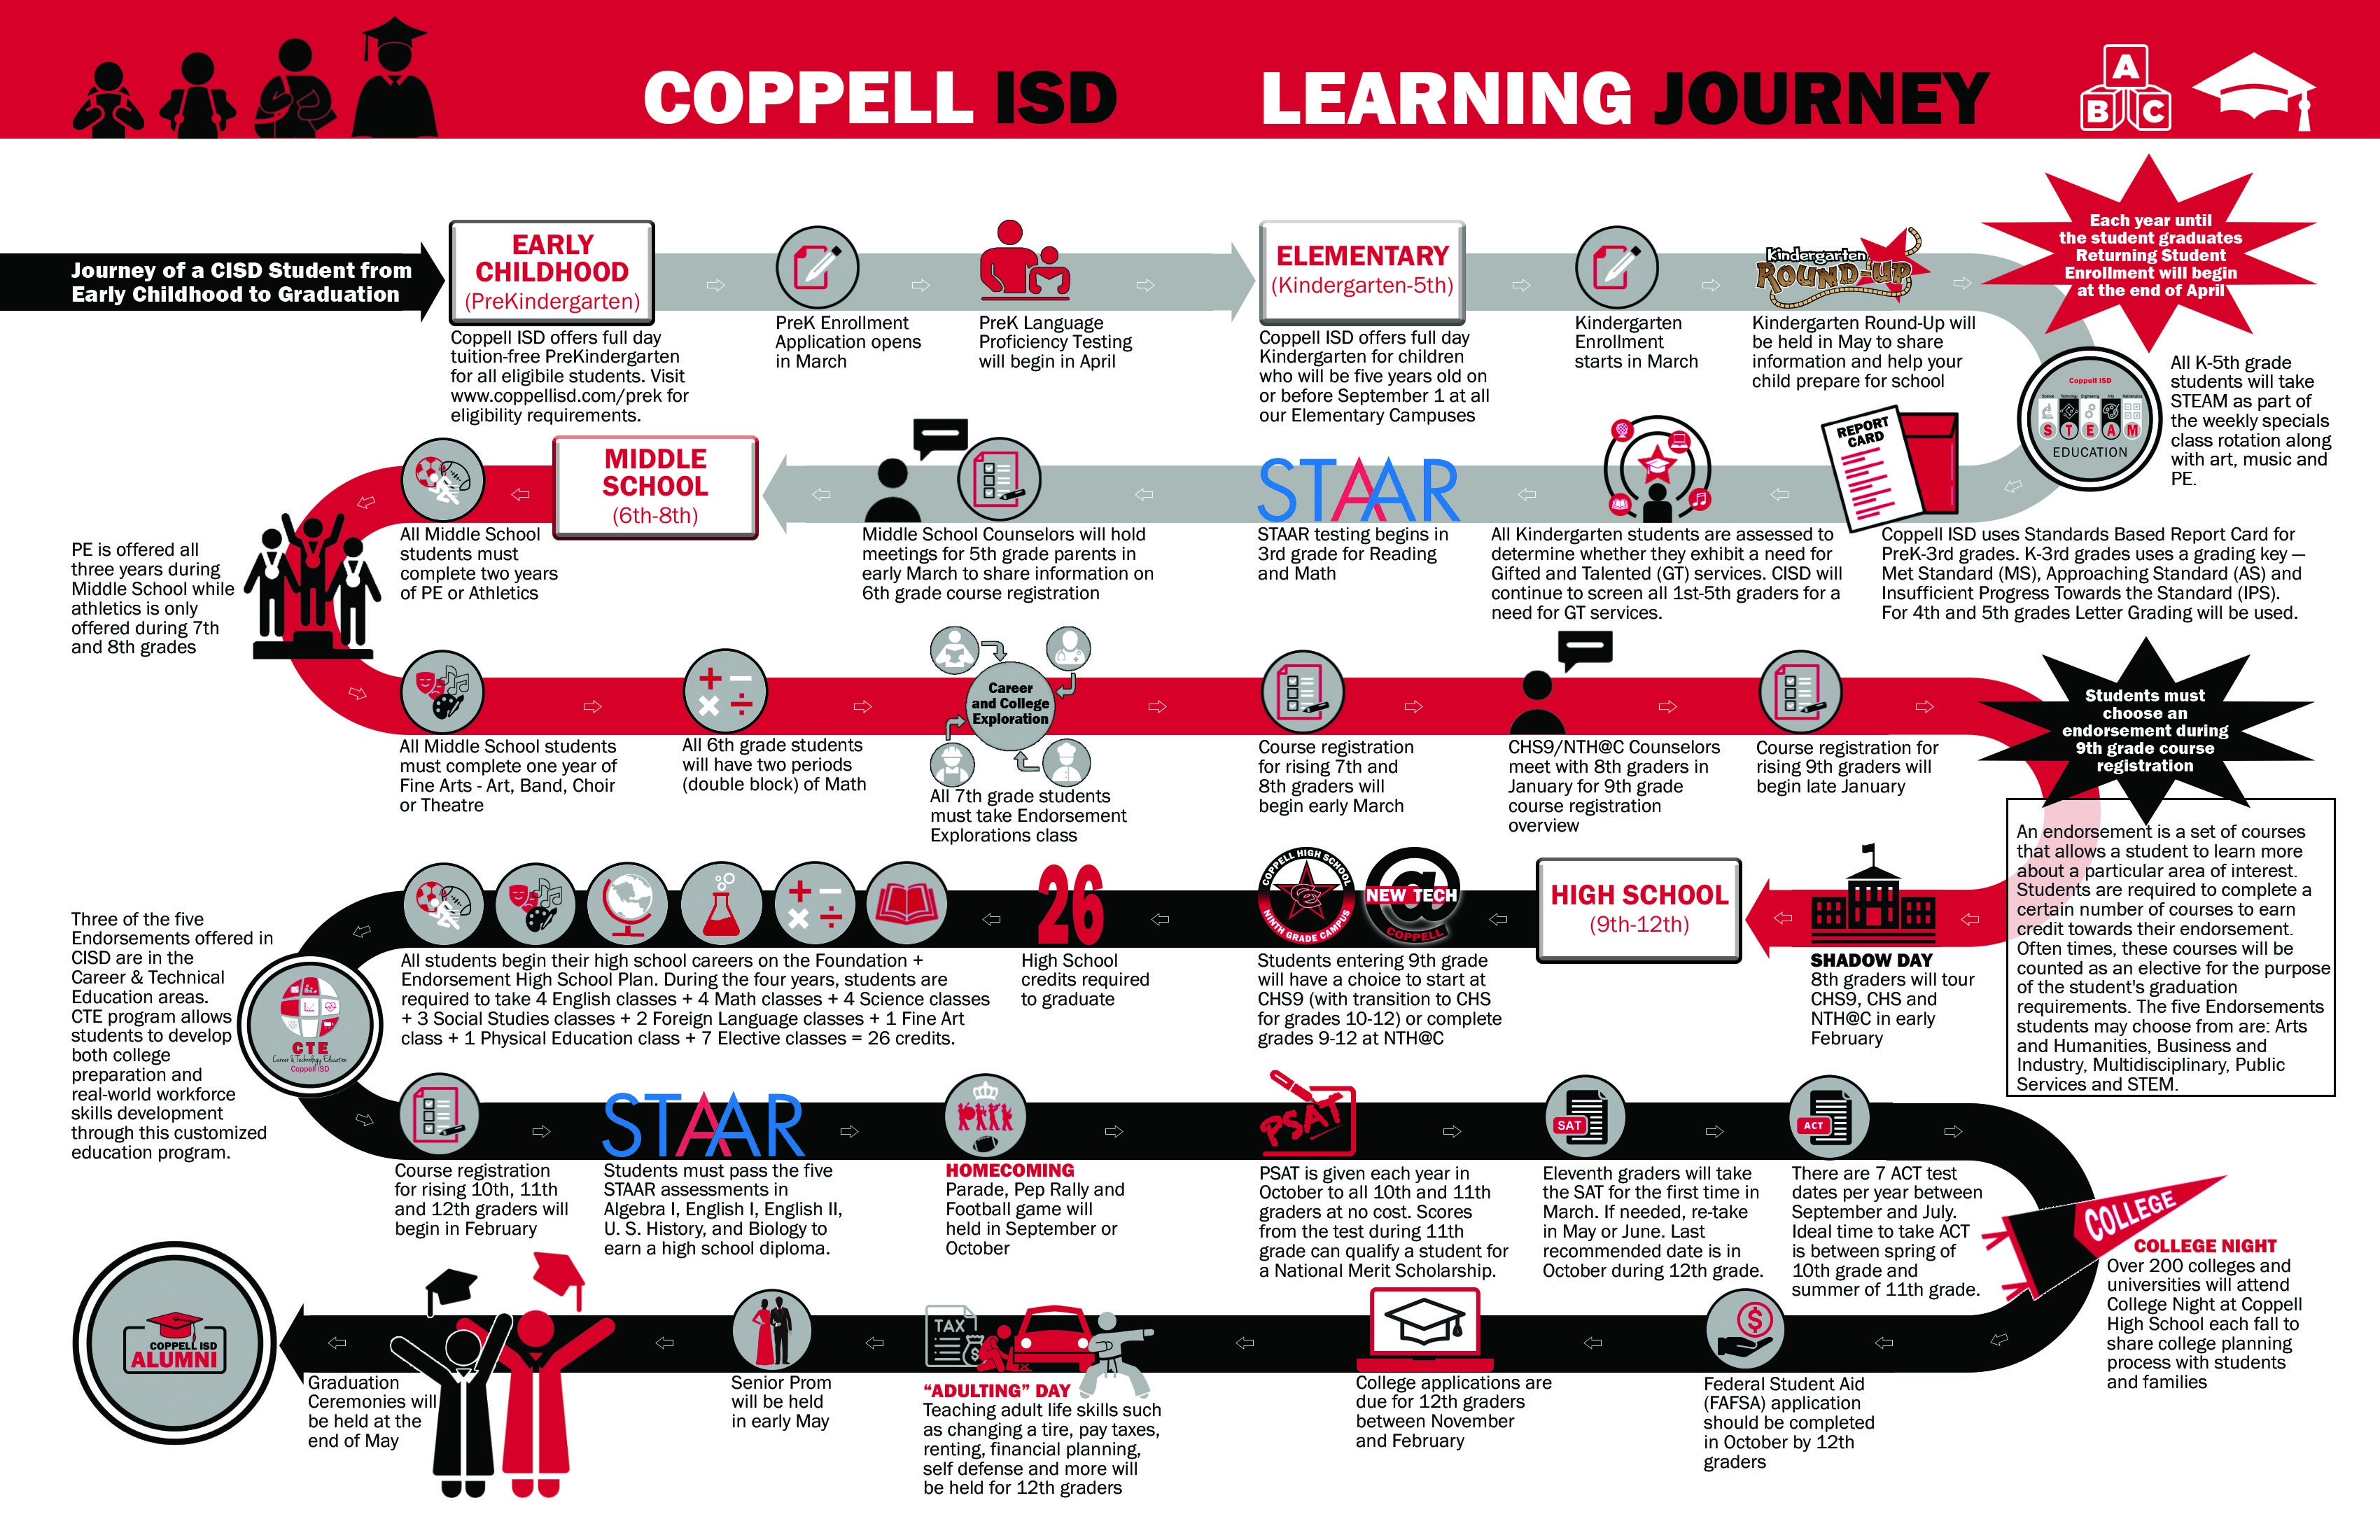 Coppell ISD Learning Journey